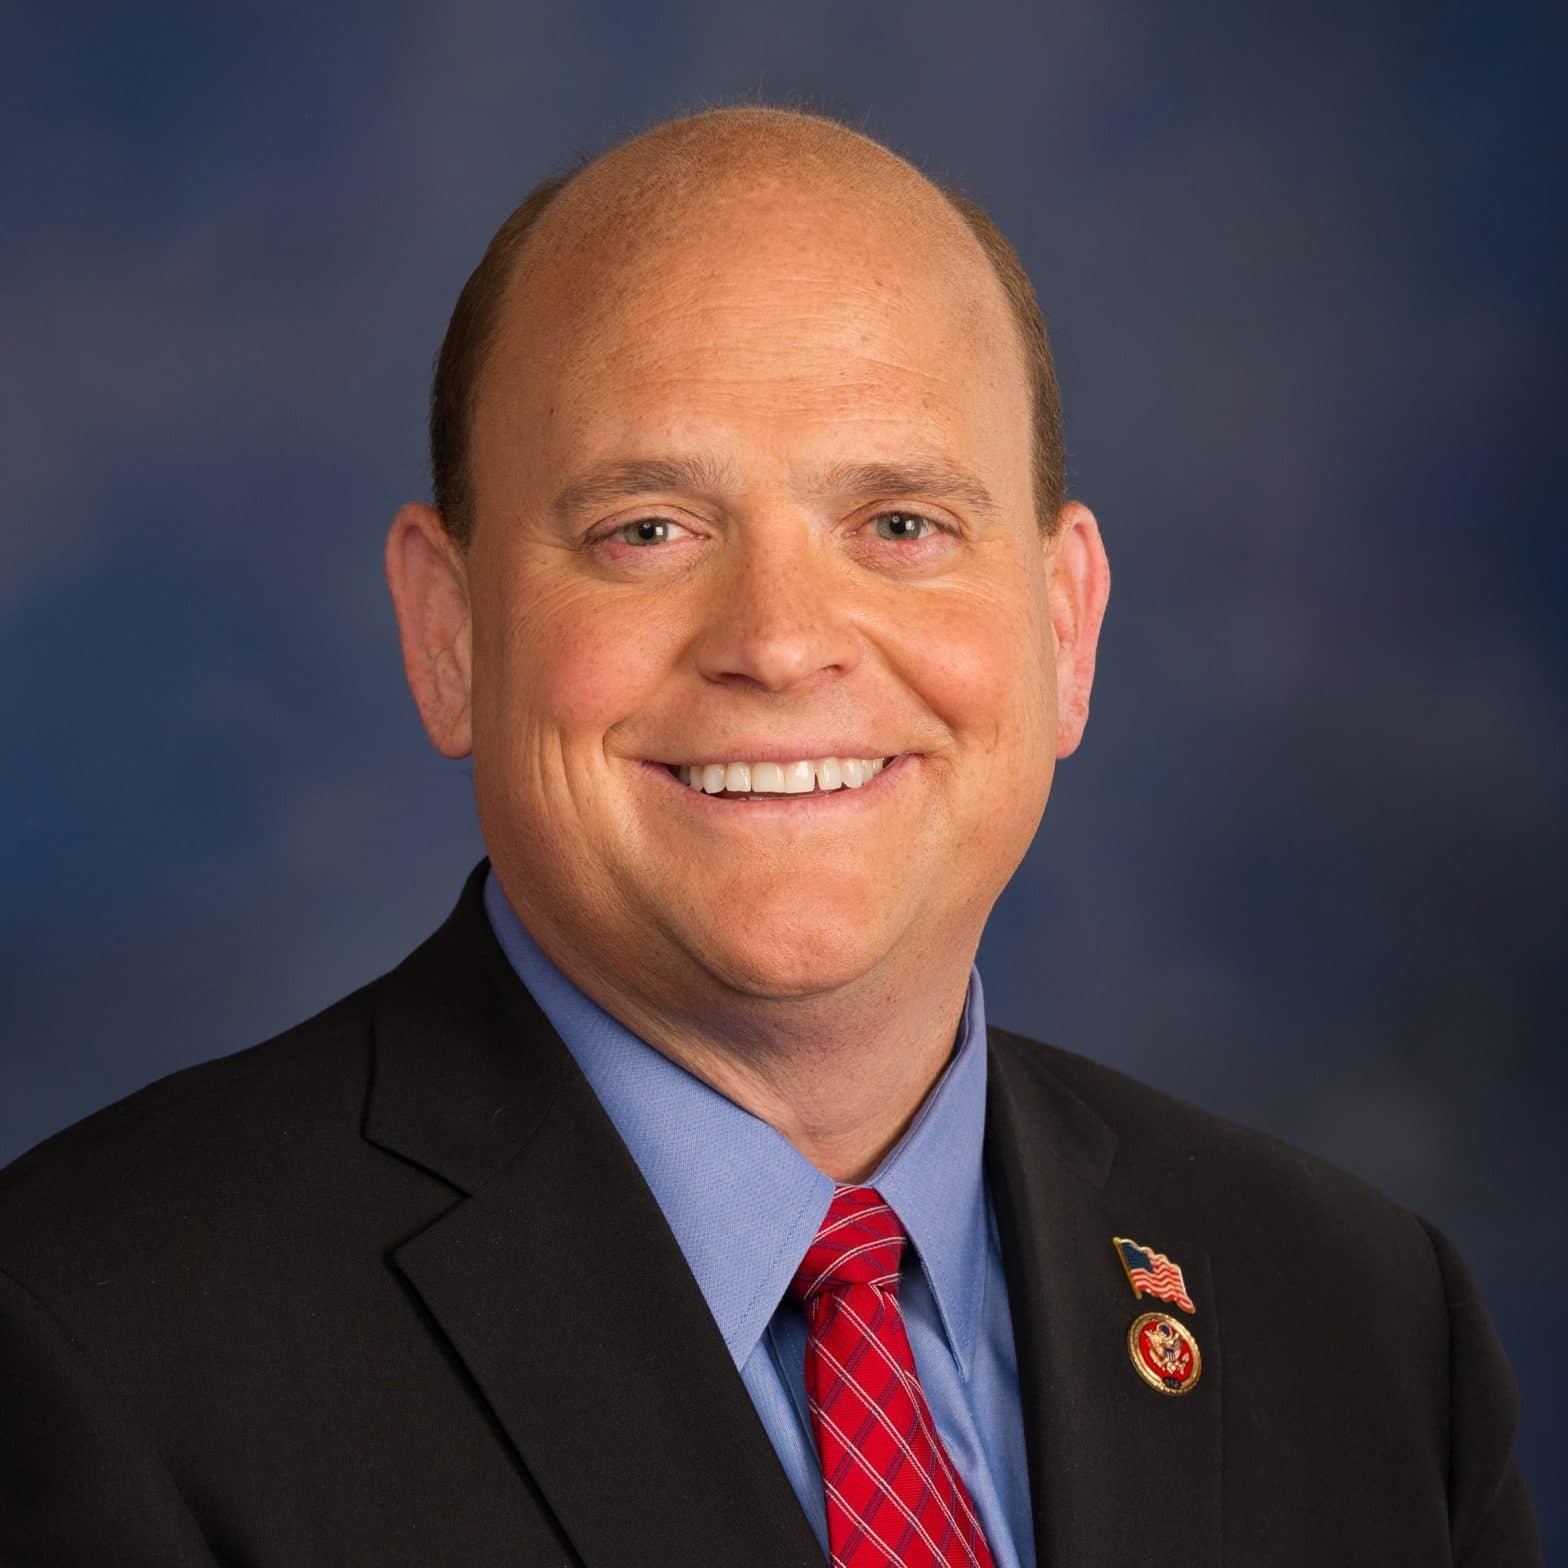 Q&A with Problem Solvers Caucus Co-Chair, Rep. Tom Reed